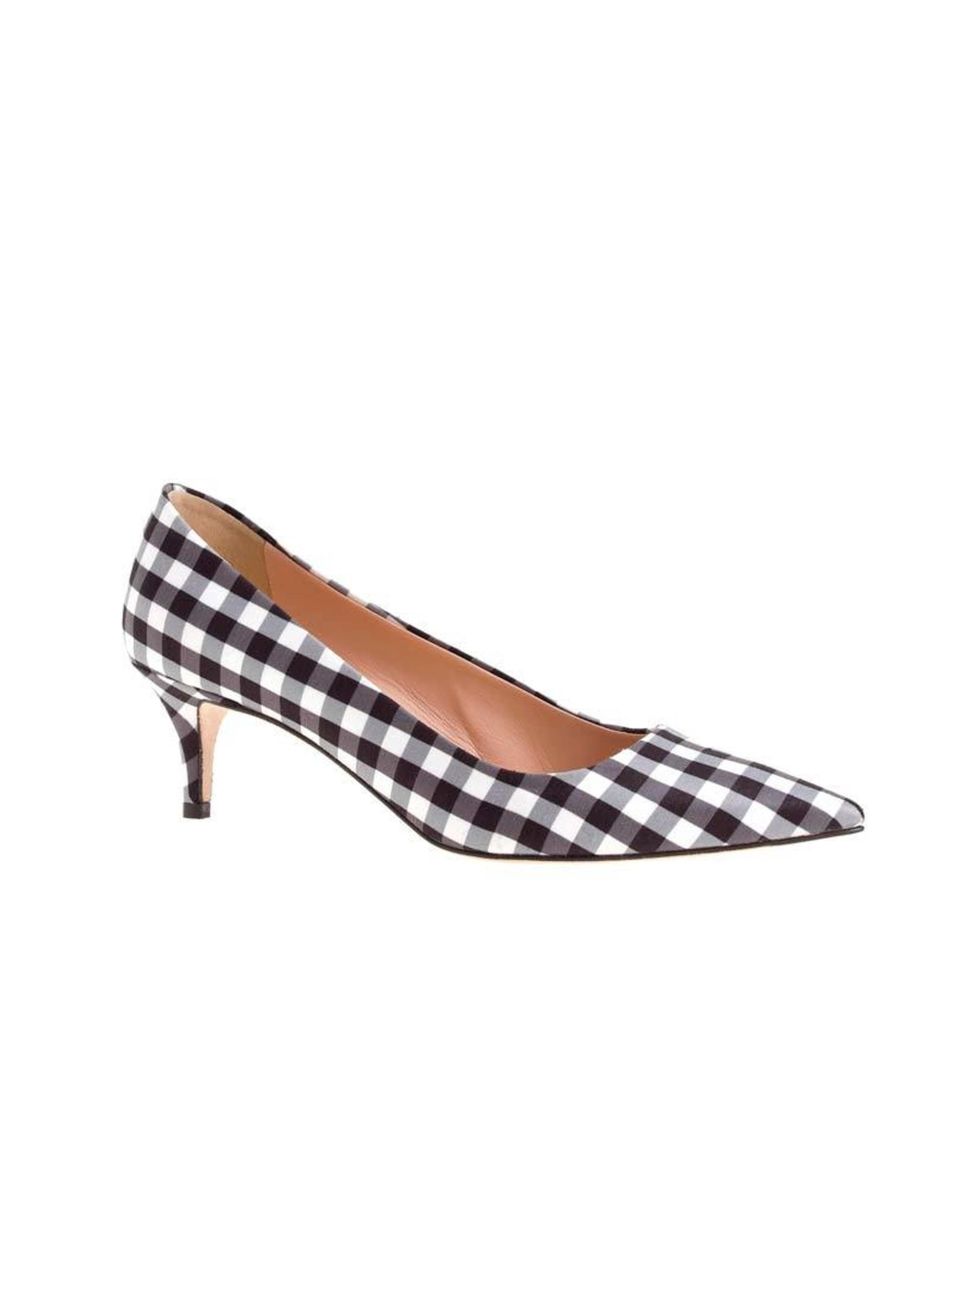 <p>We've got a sudden gingham craving. Wear with slightly cropped jeans.</p>

<p><a href="https://www.jcrew.com/uk/womens_feature/NewArrivals/shoes/PRDOVR~C9859/C9859.jsp" target="_blank">J.Crew</a> shoes, £228</p>